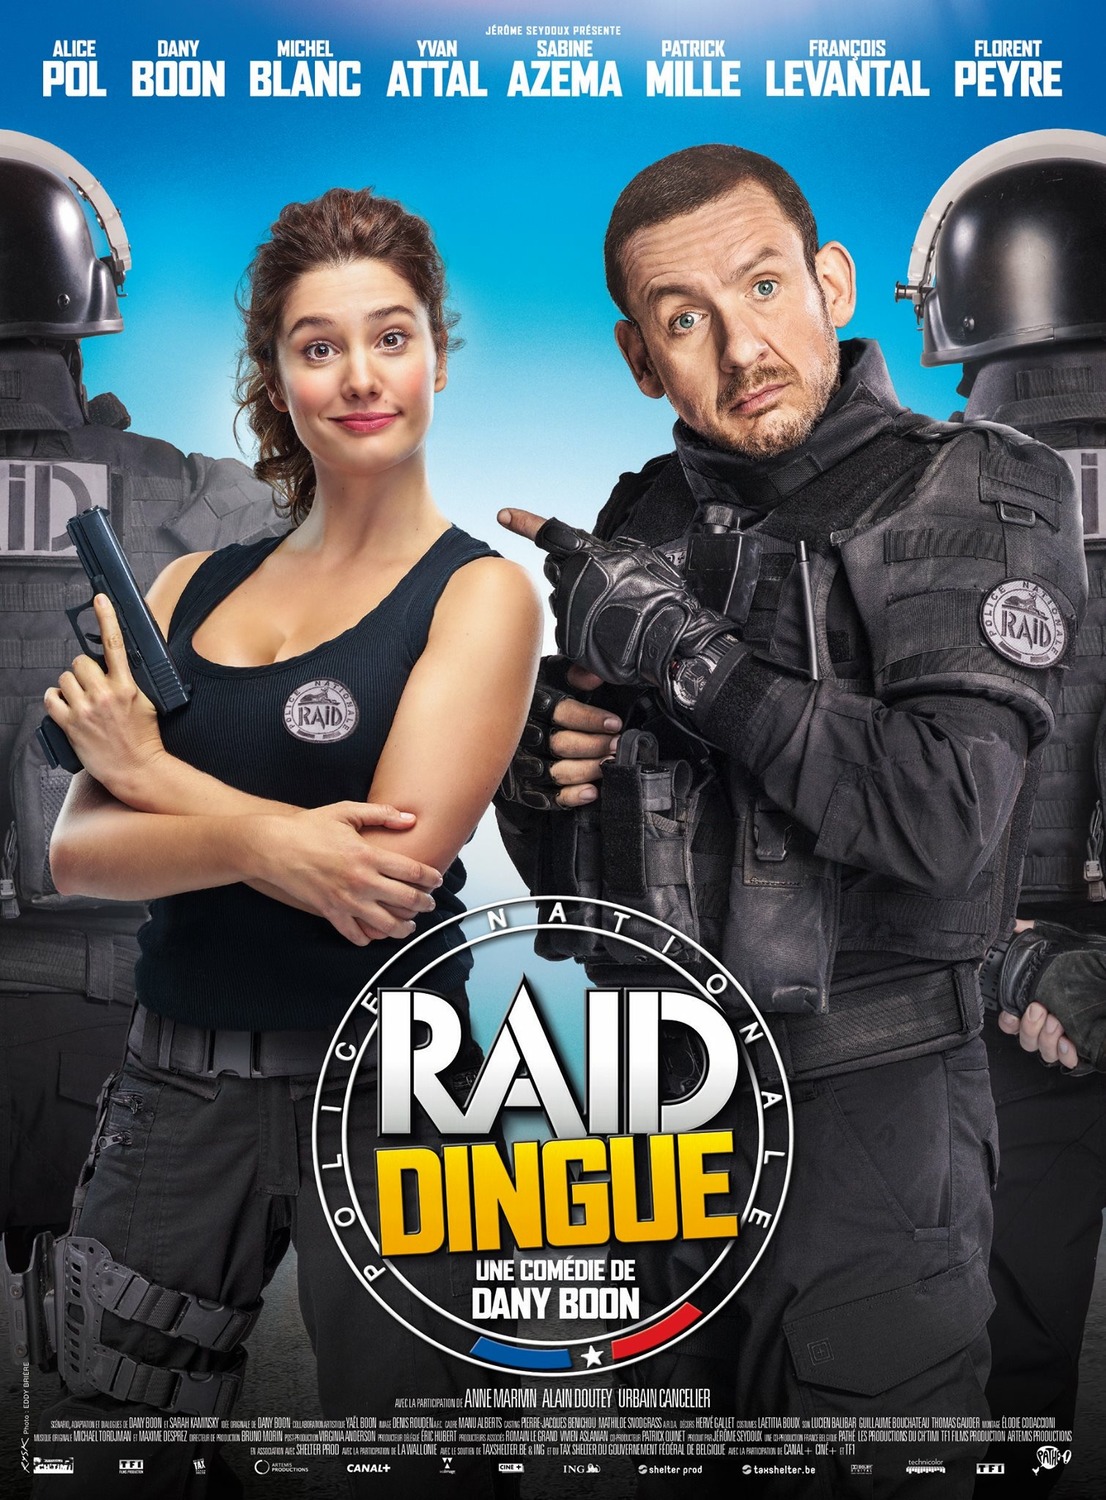 Extra Large Movie Poster Image for Raid dingue 